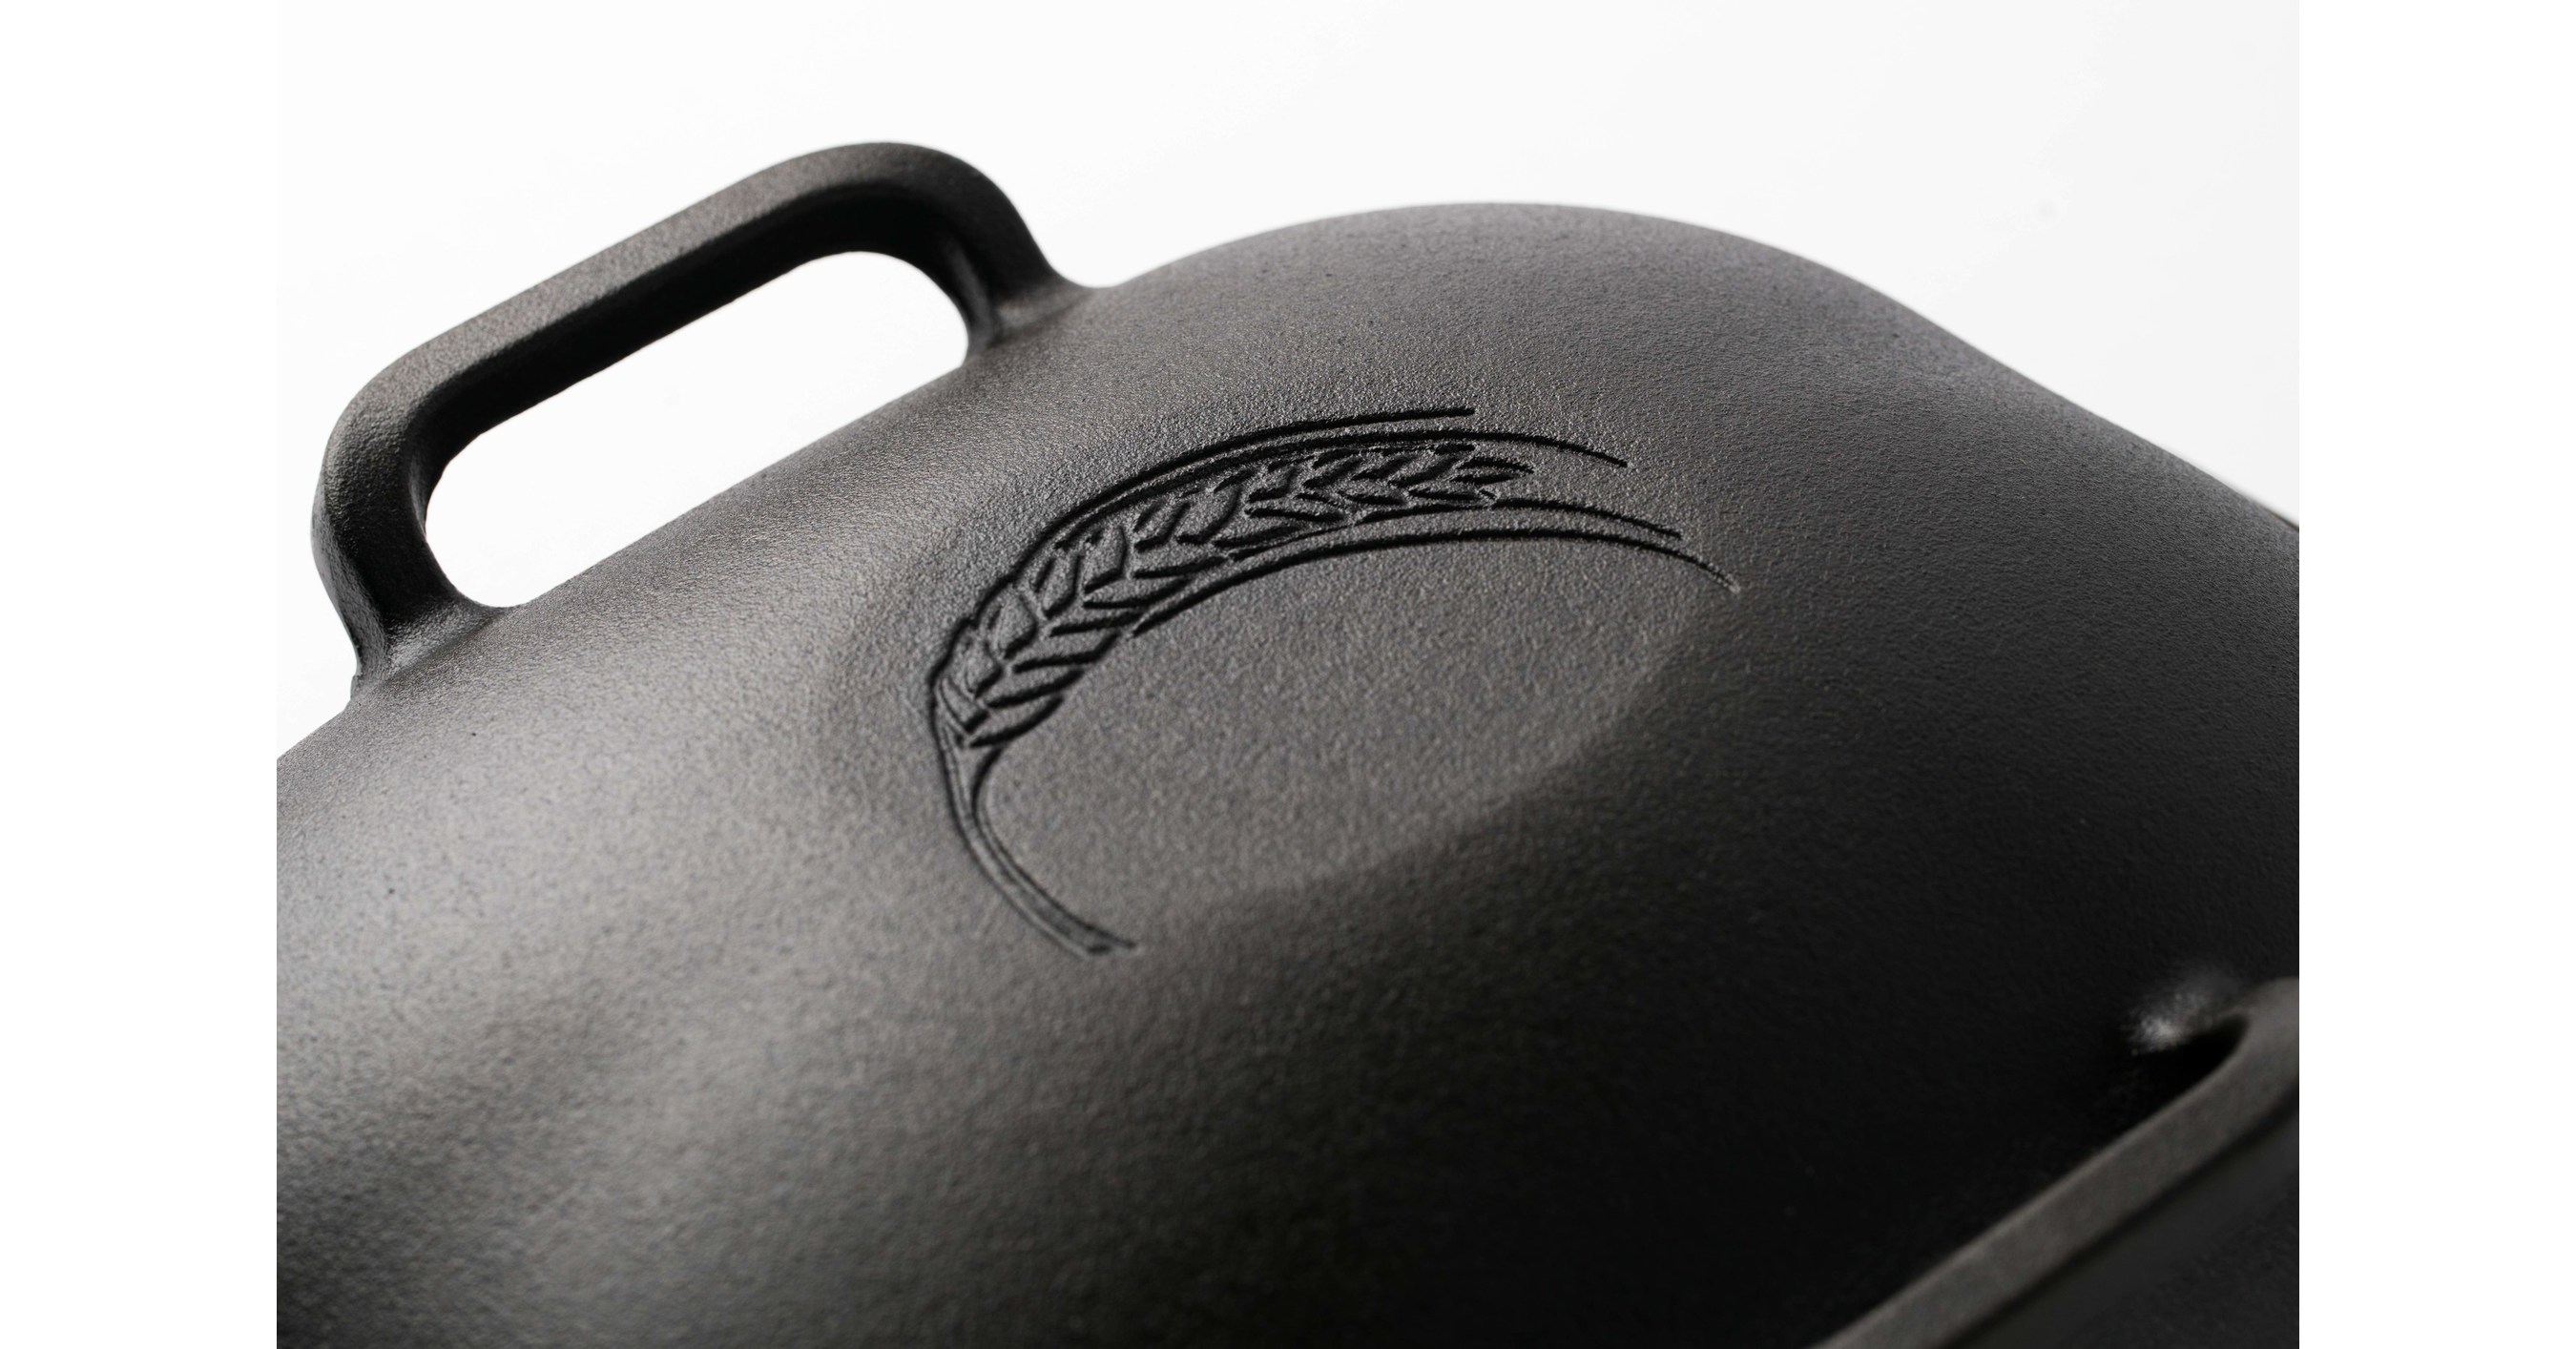 Challenger Bread Pan Launched Globally After Enthusiastic Baker Response  and Sold Out Stock